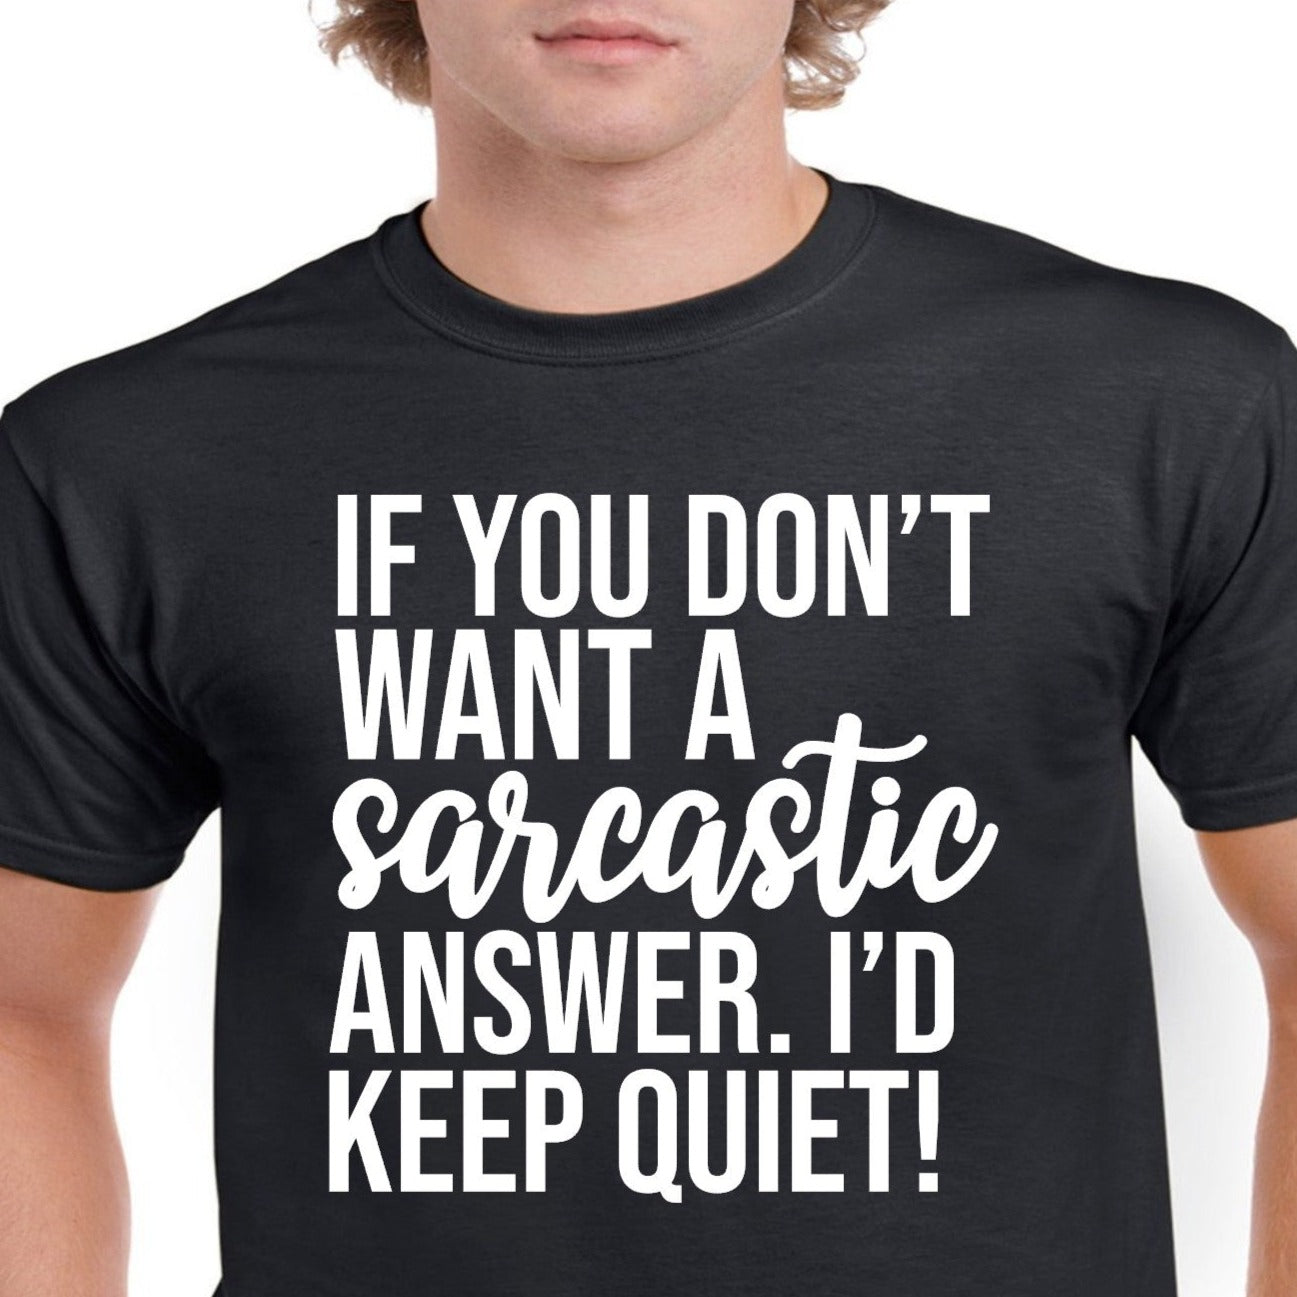 If You Don't Want a Sarcastic Answer. I'd Keep Quiet!